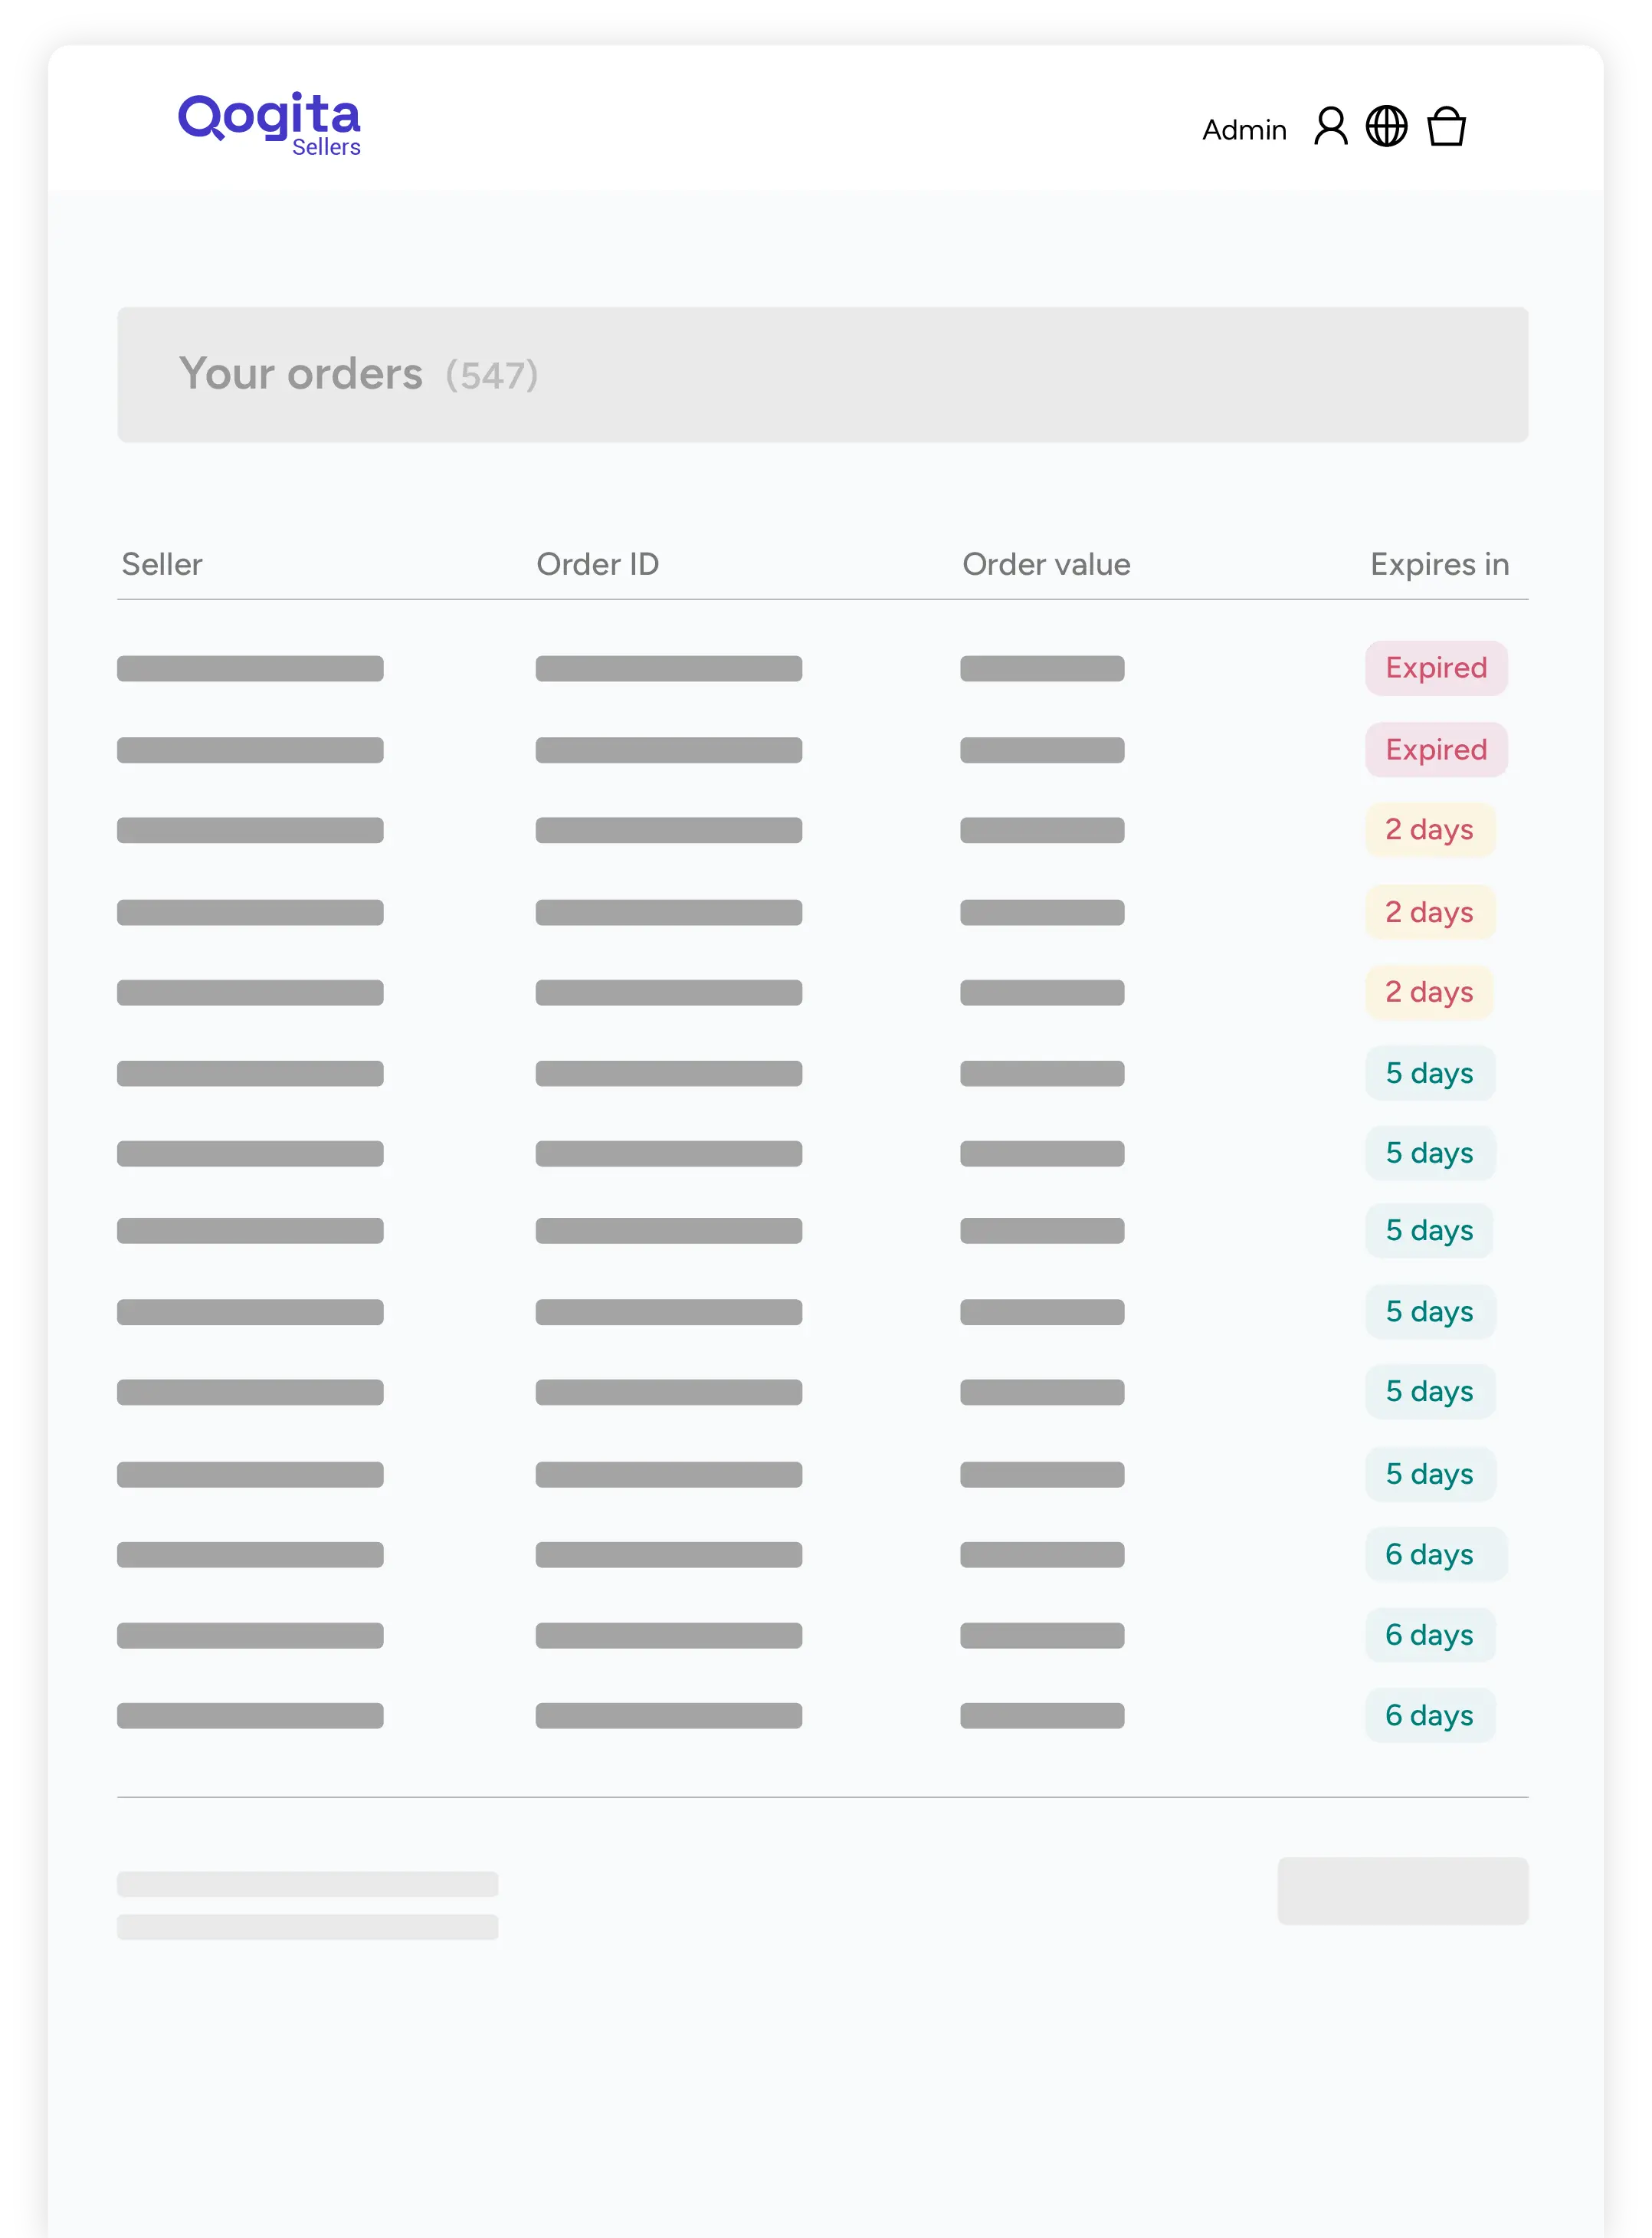 A screenshot of the seller portal, showing the orders table